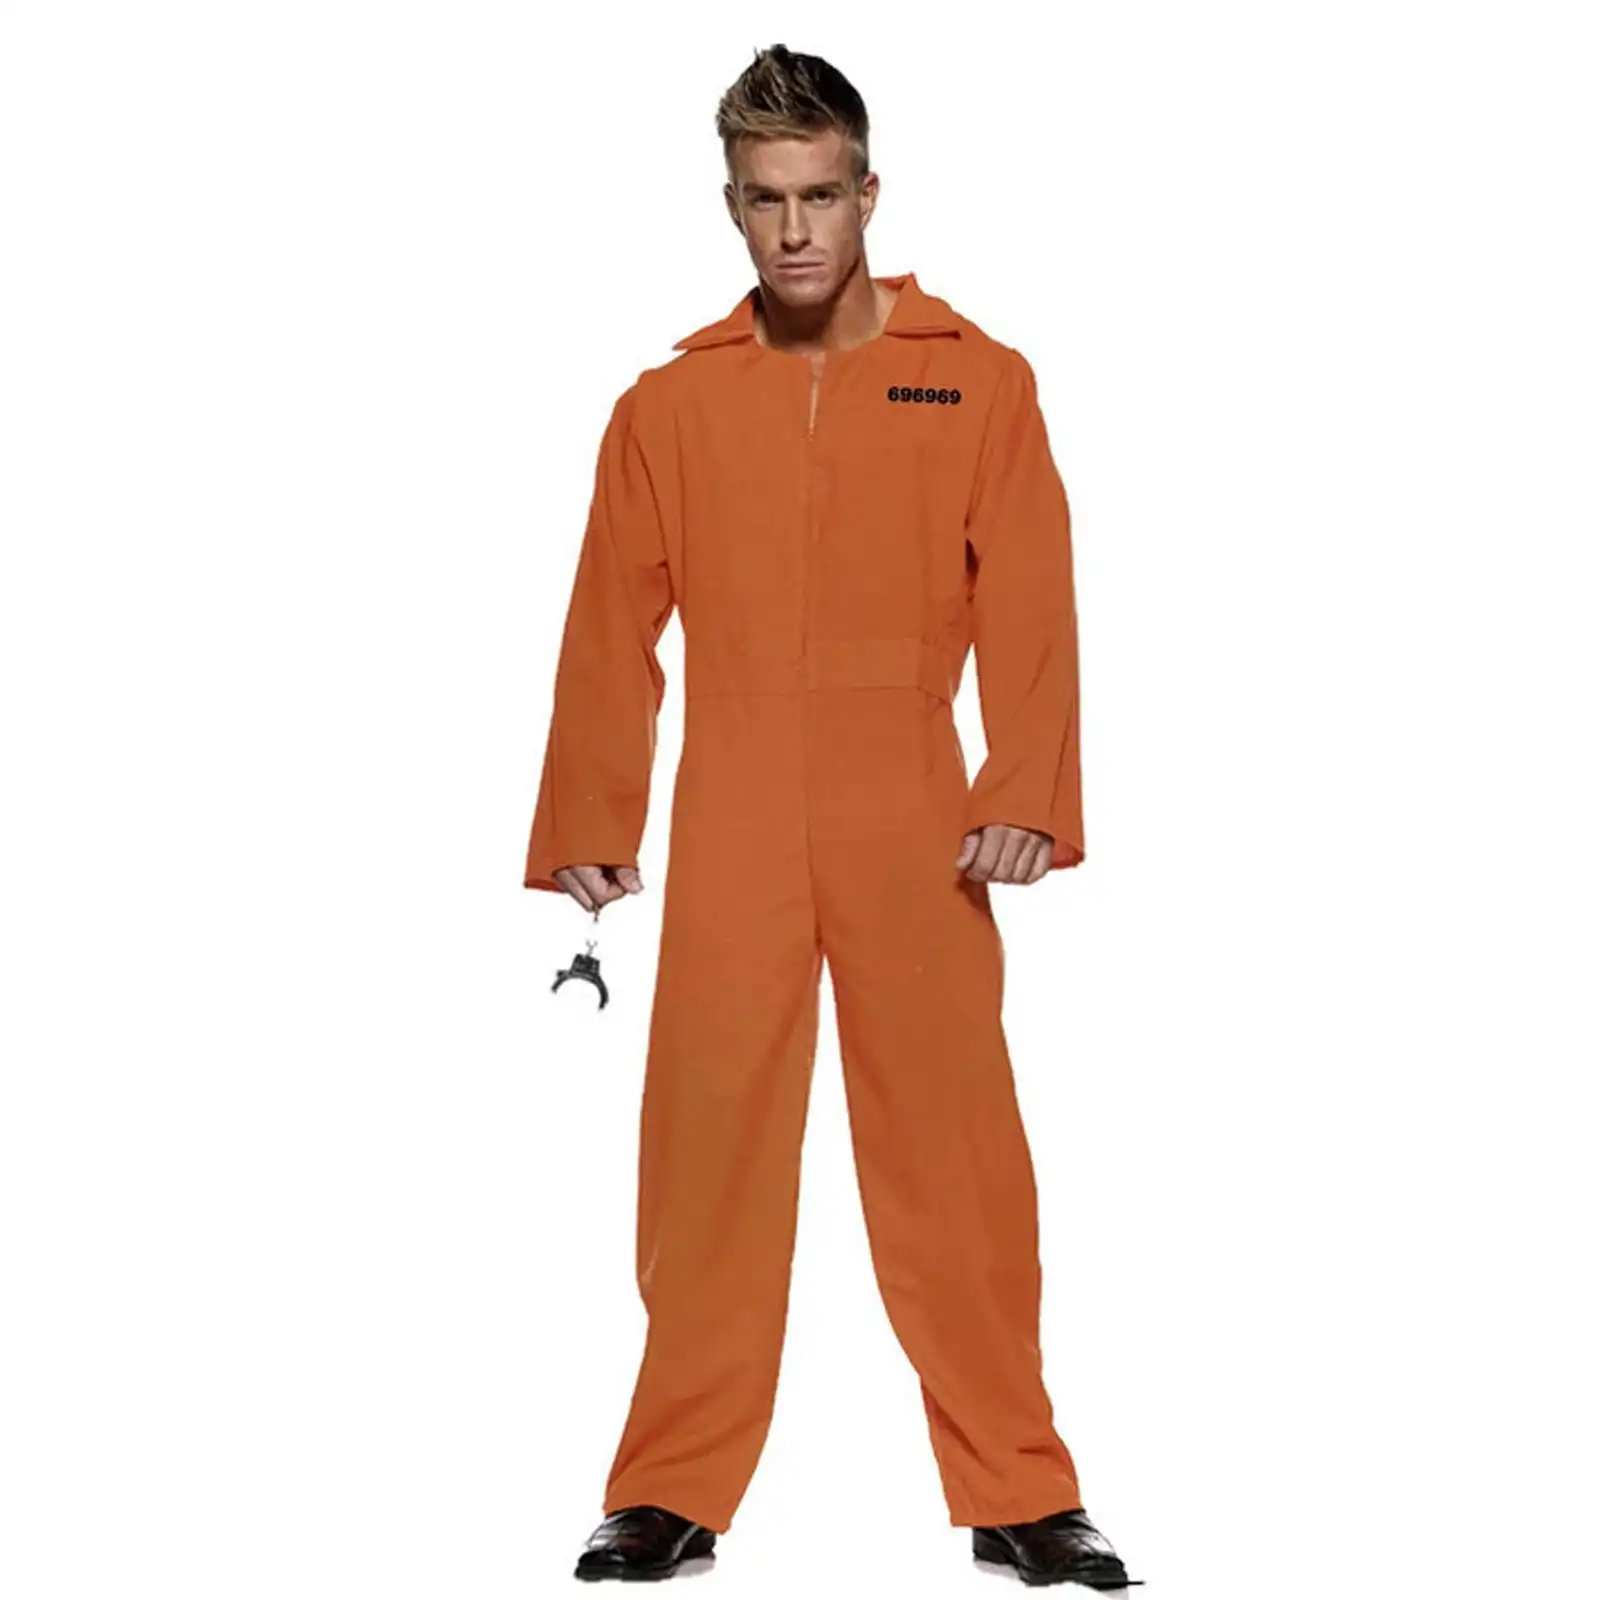 PRISONER COSTUME Plus Size Halloween Jail Convict Adult Outfit Long Sleeve